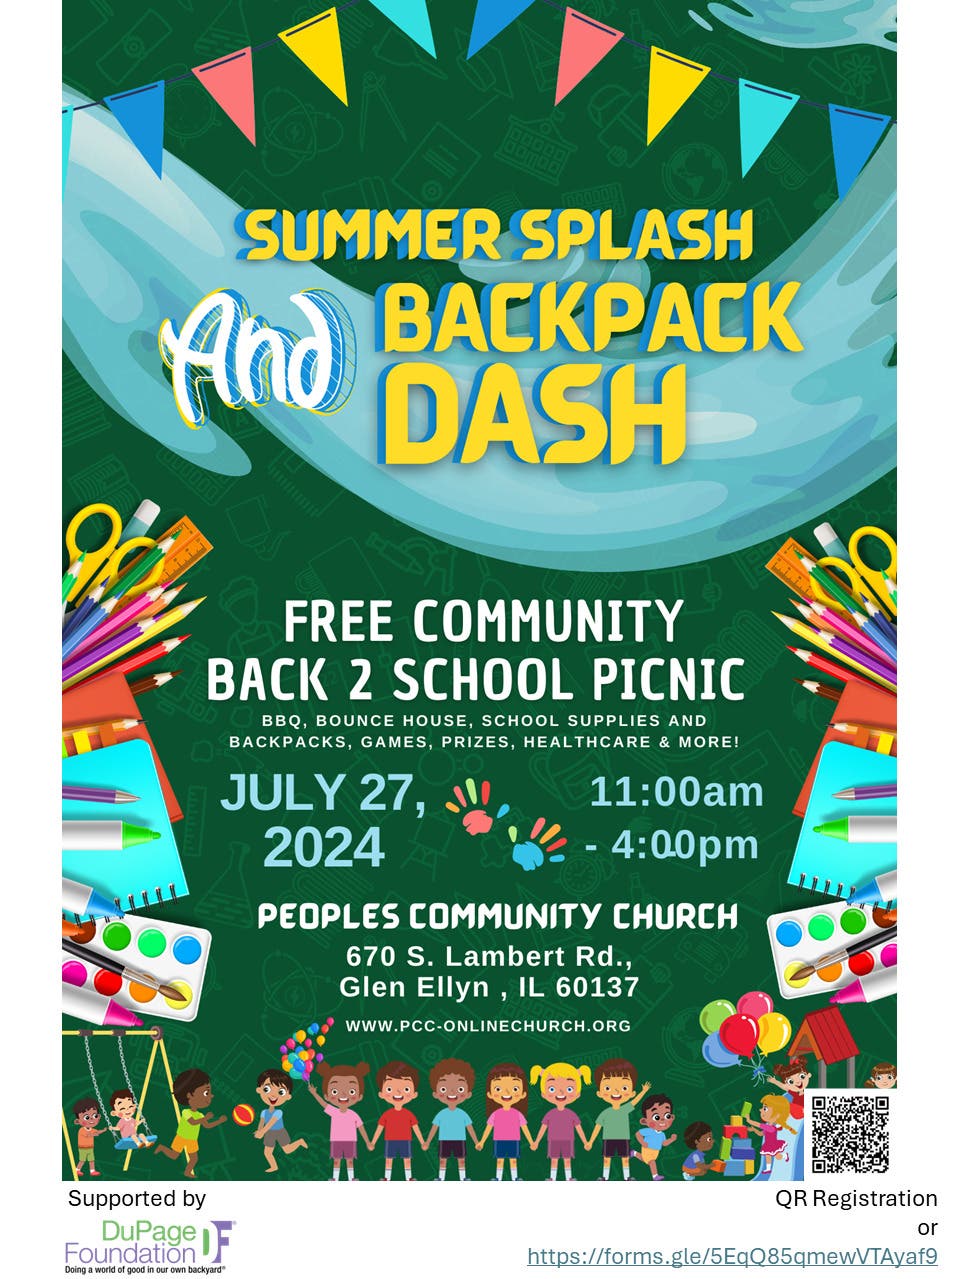 FREE Community Back-to-School BBQ Picnic and Backpack Giveaway